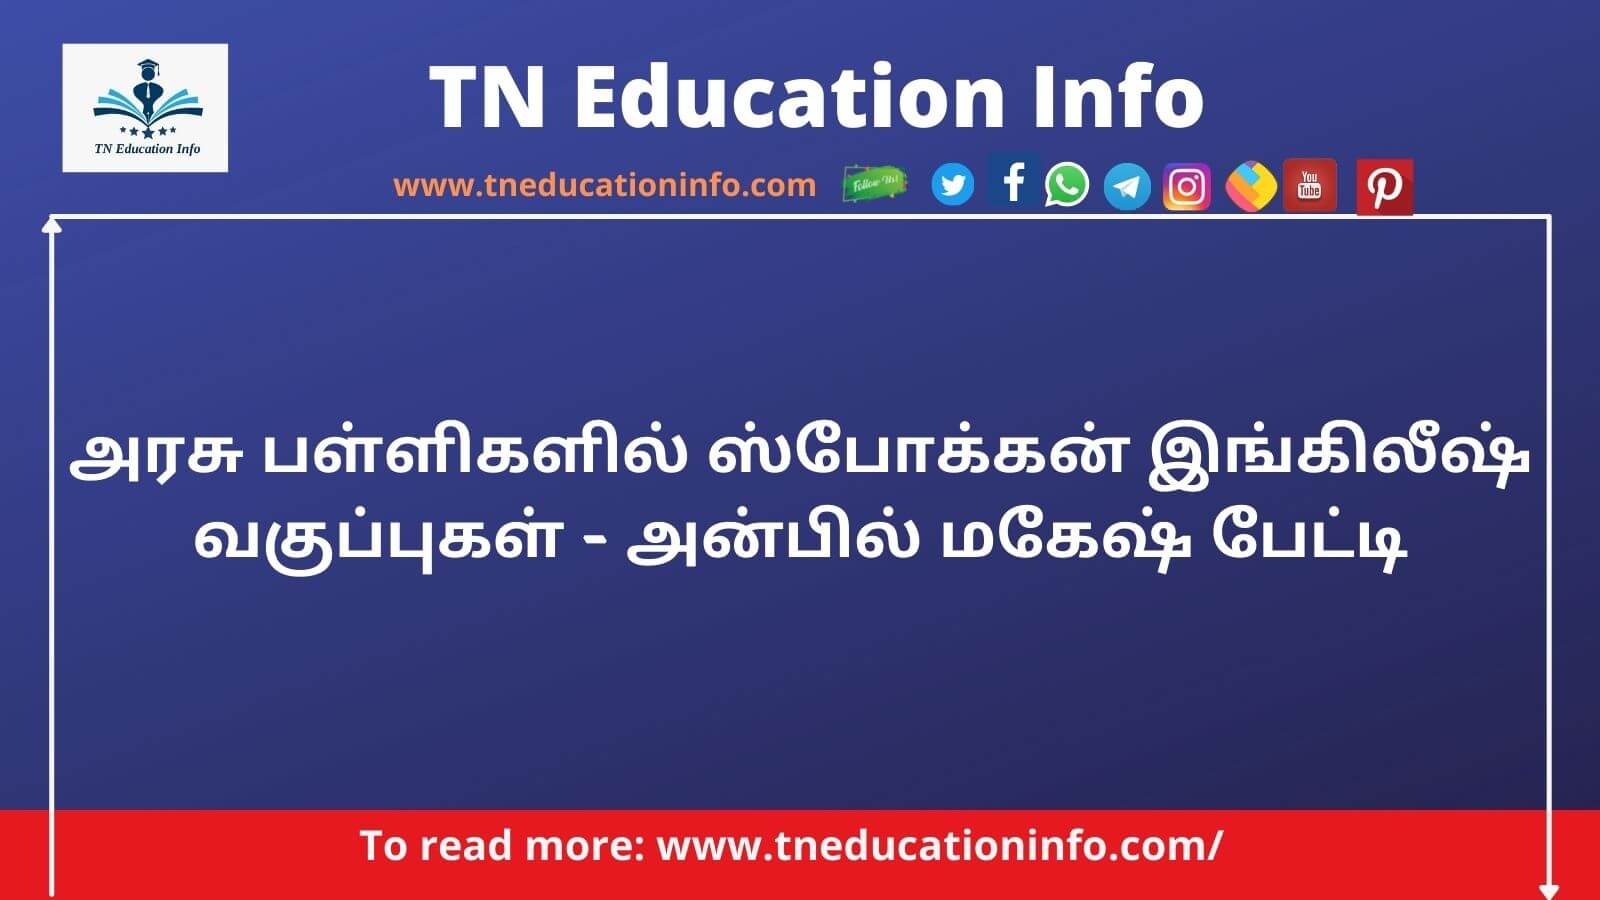 Spoken English Class at Government Schools in Tamil Nadu